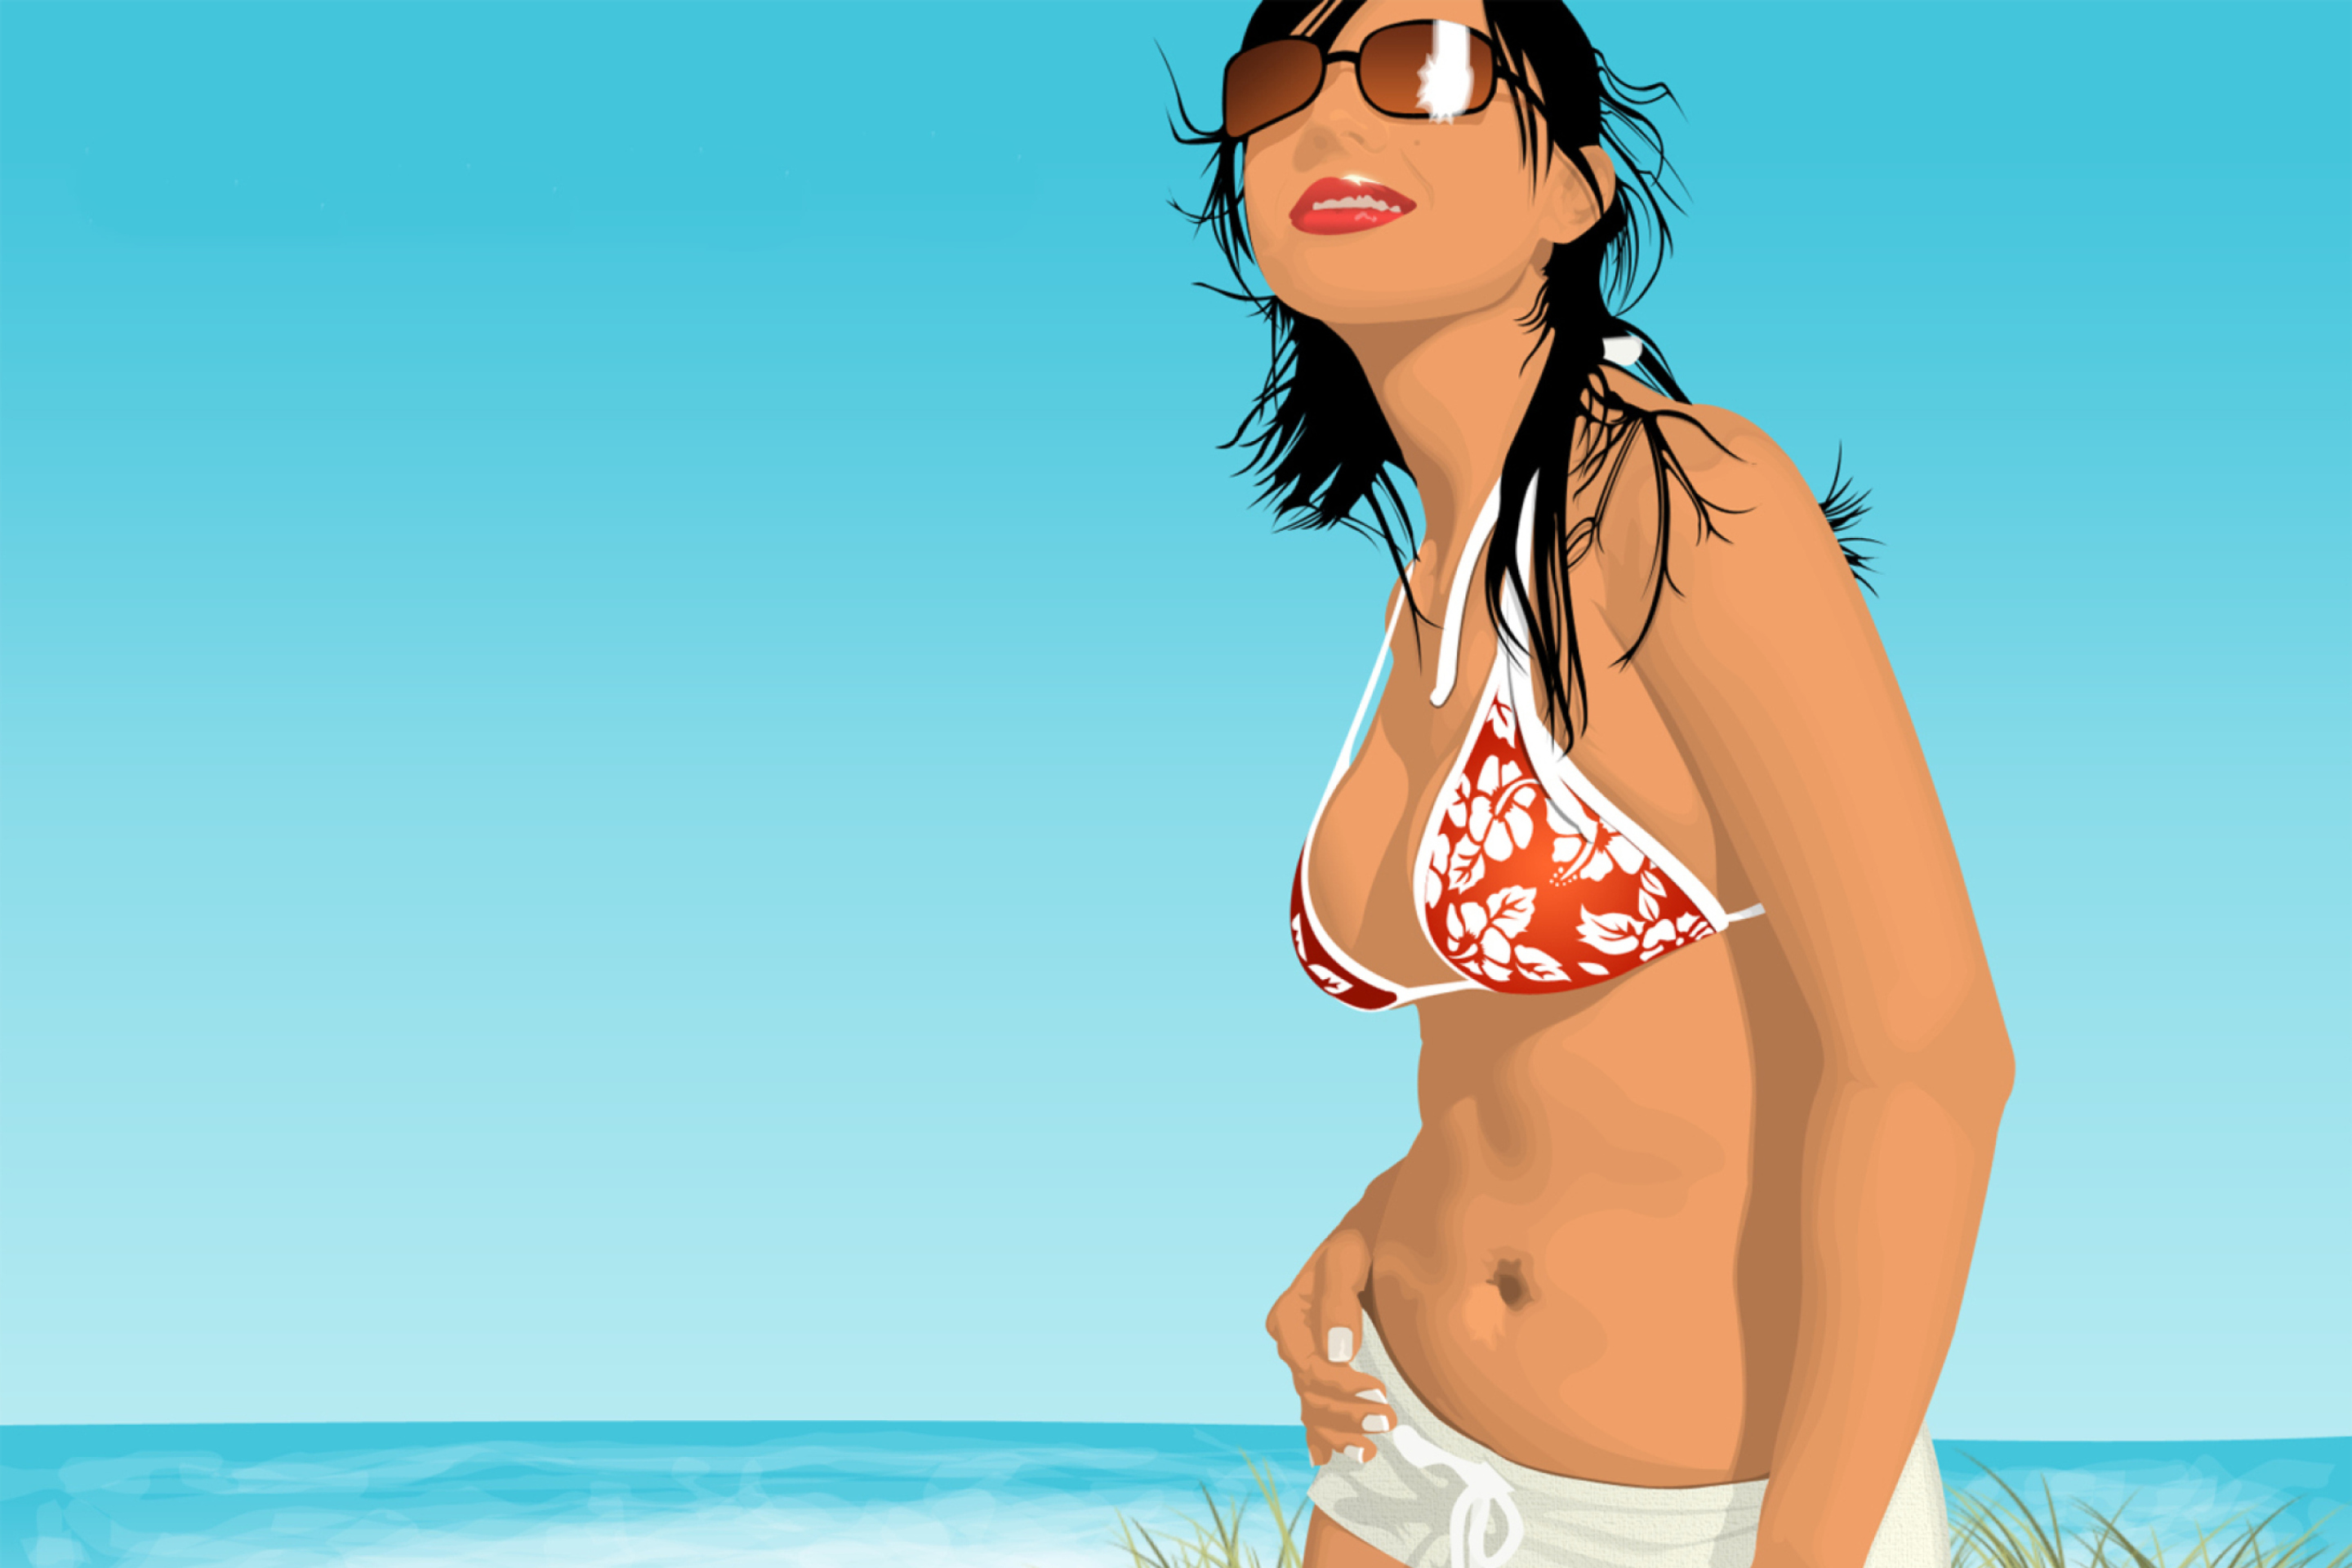 Girl On The Beach Wallpaper for HTC 10.